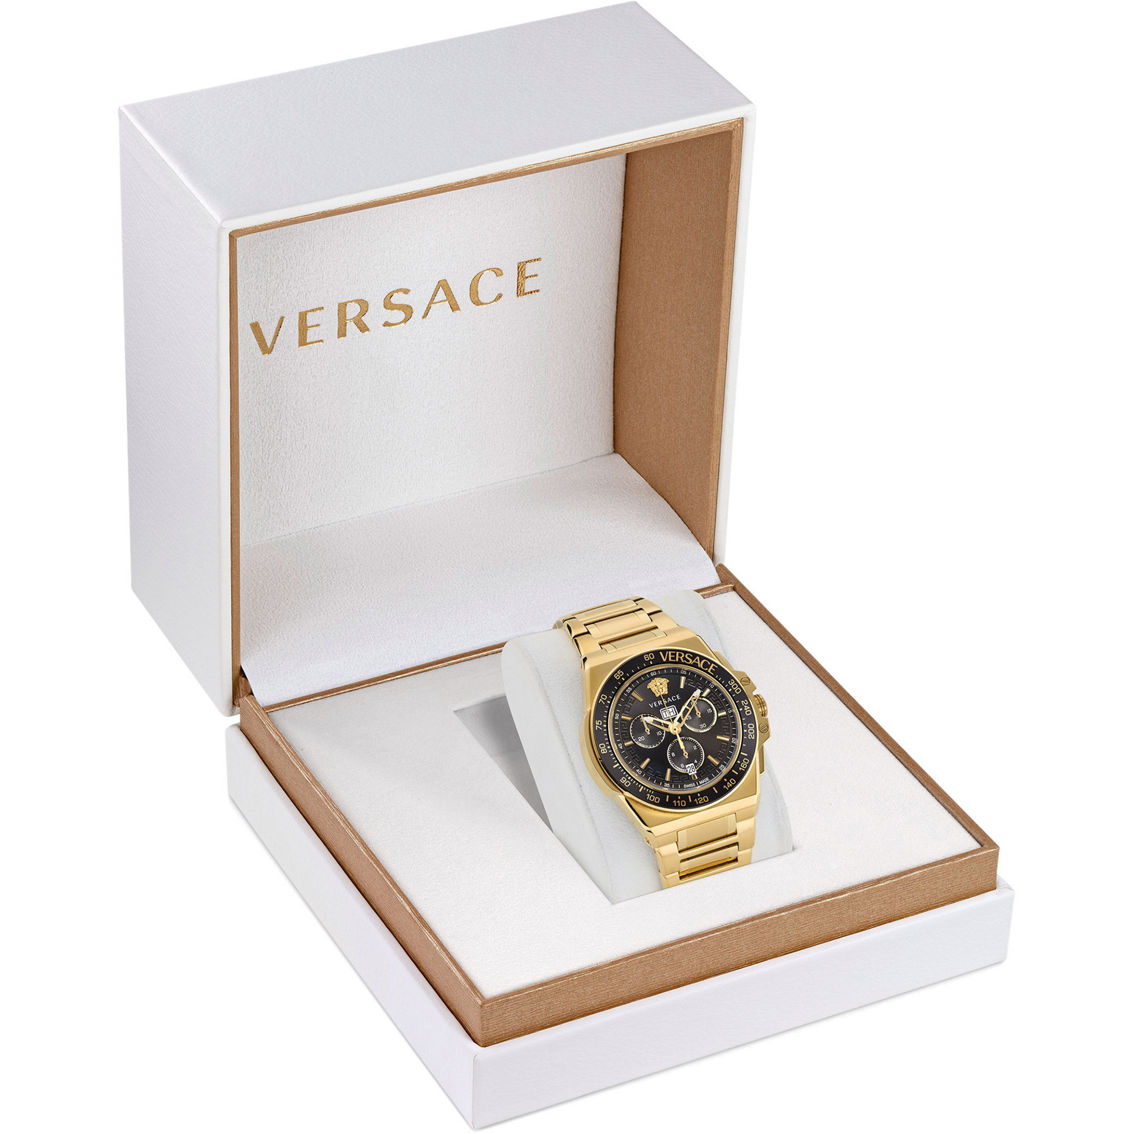 Versace Greca Extreme Black Watches Goldtone Ve7h00623 | Band Chrono Exchange & Dial Jewelry | Yellow Ip Gold Stainless Shop | Watch The